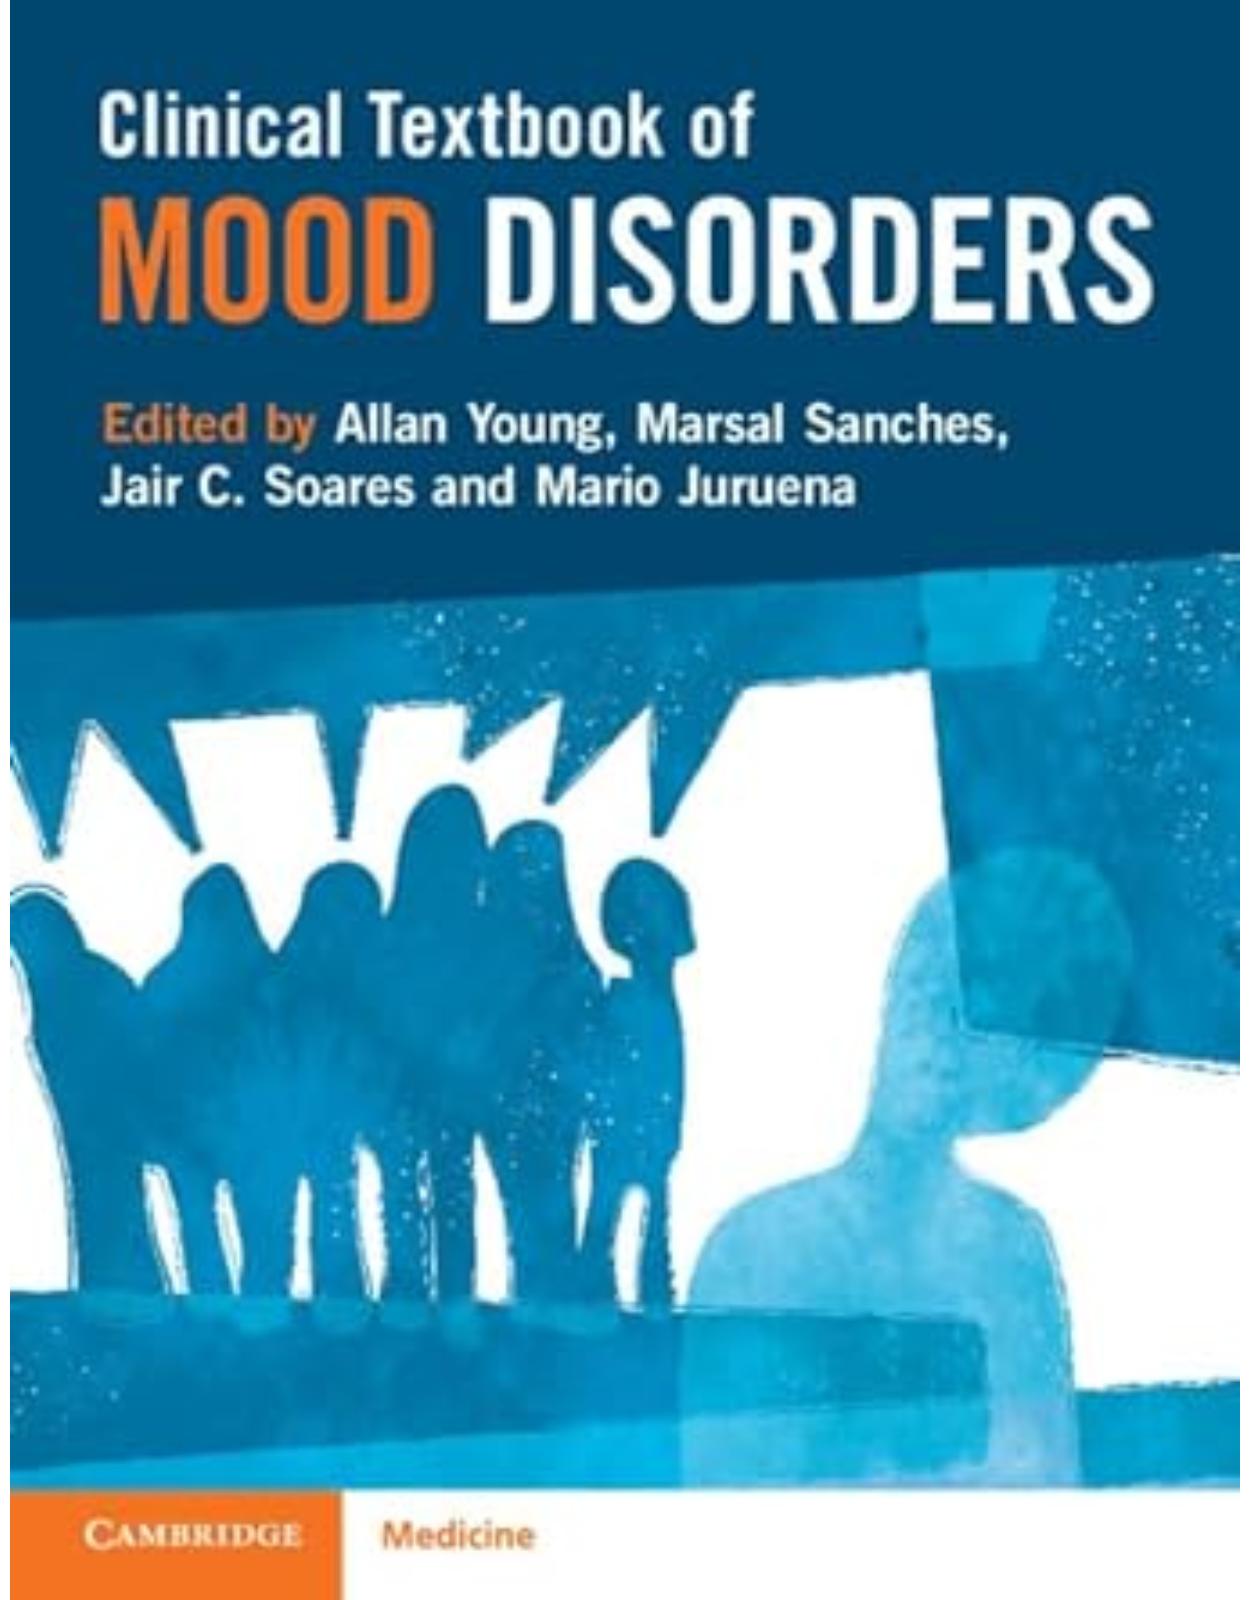 Clinical Textbook of Mood Disorders